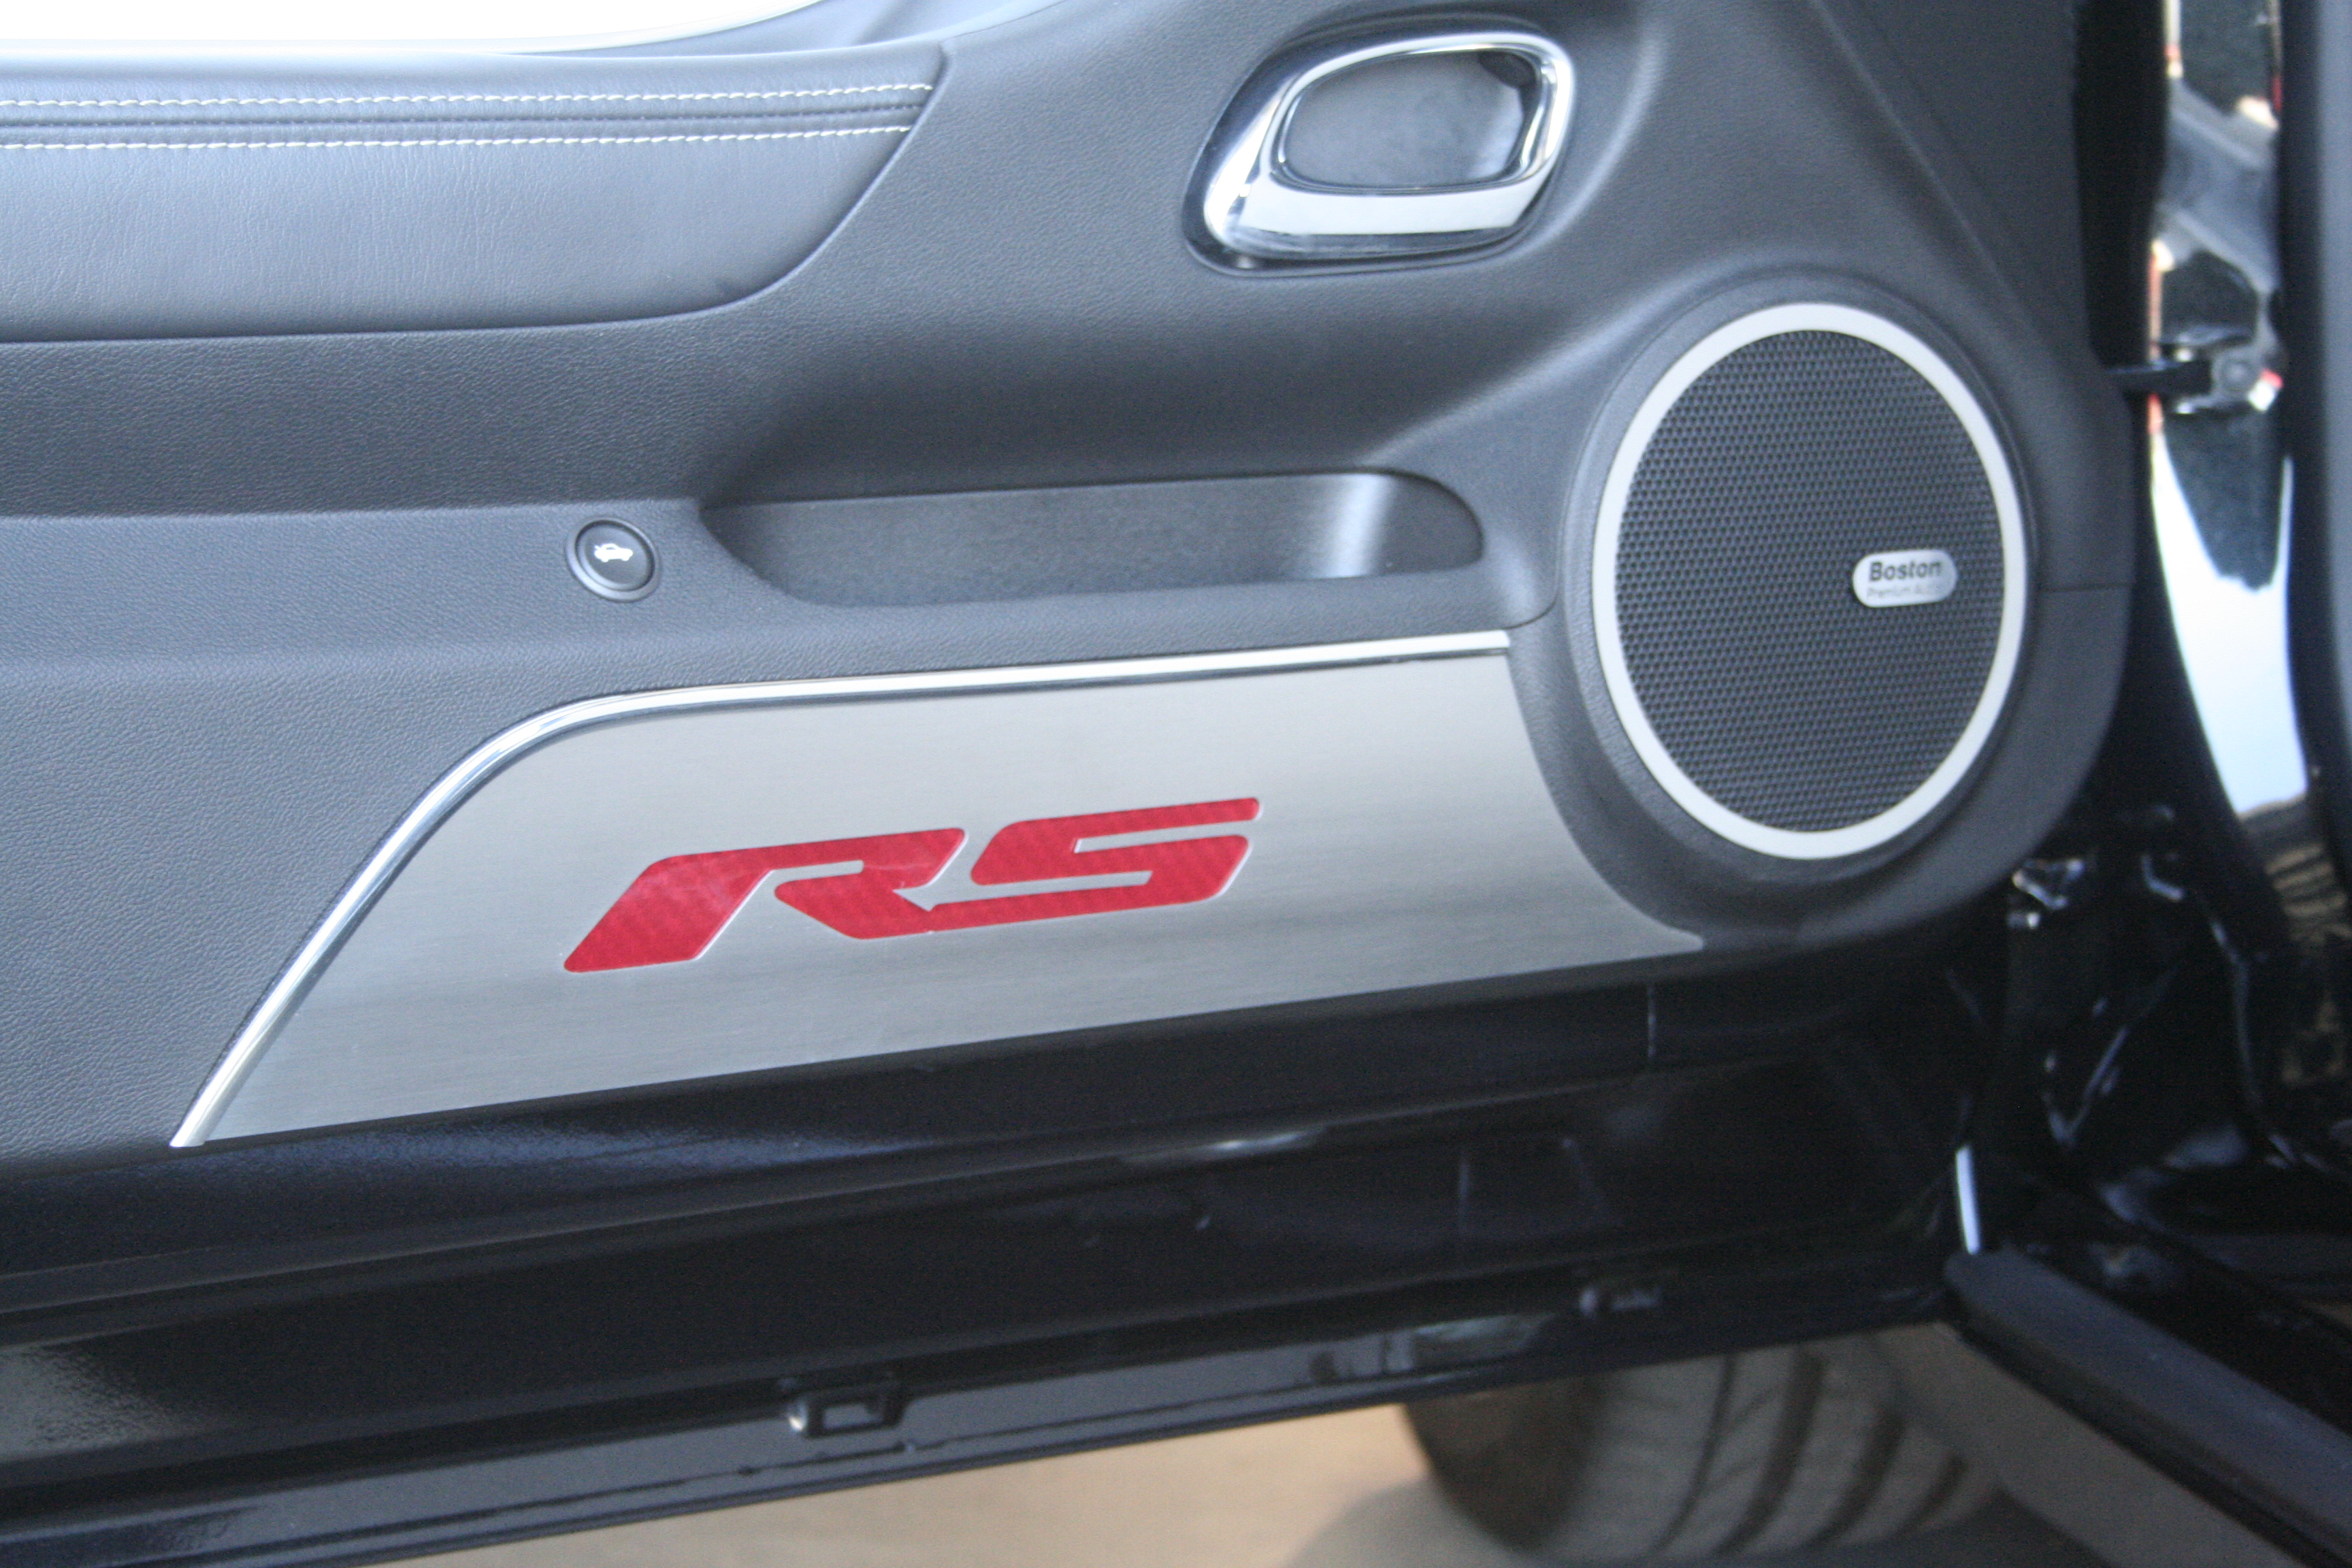 Camaro All Models 10-13 Door Panel Kick Plates "RS Style" Brushed 2pc Colors (Y,R,BL,BK)